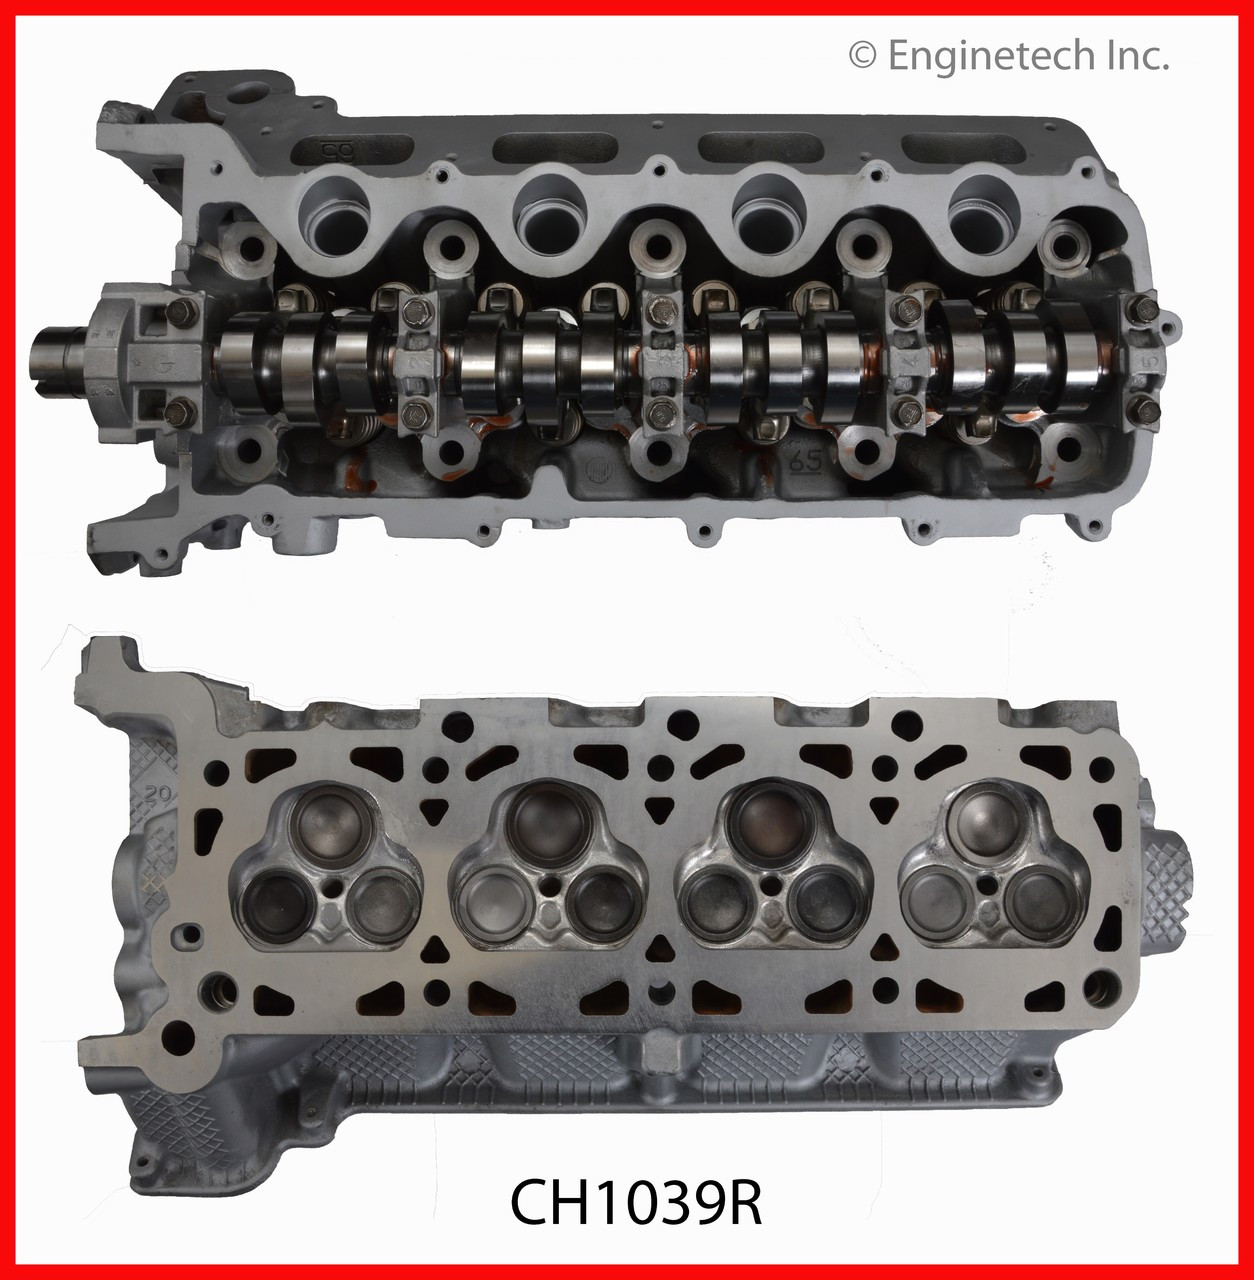 2006 Ford F-150 5.4L Engine Cylinder Head Assembly CH1039R -8